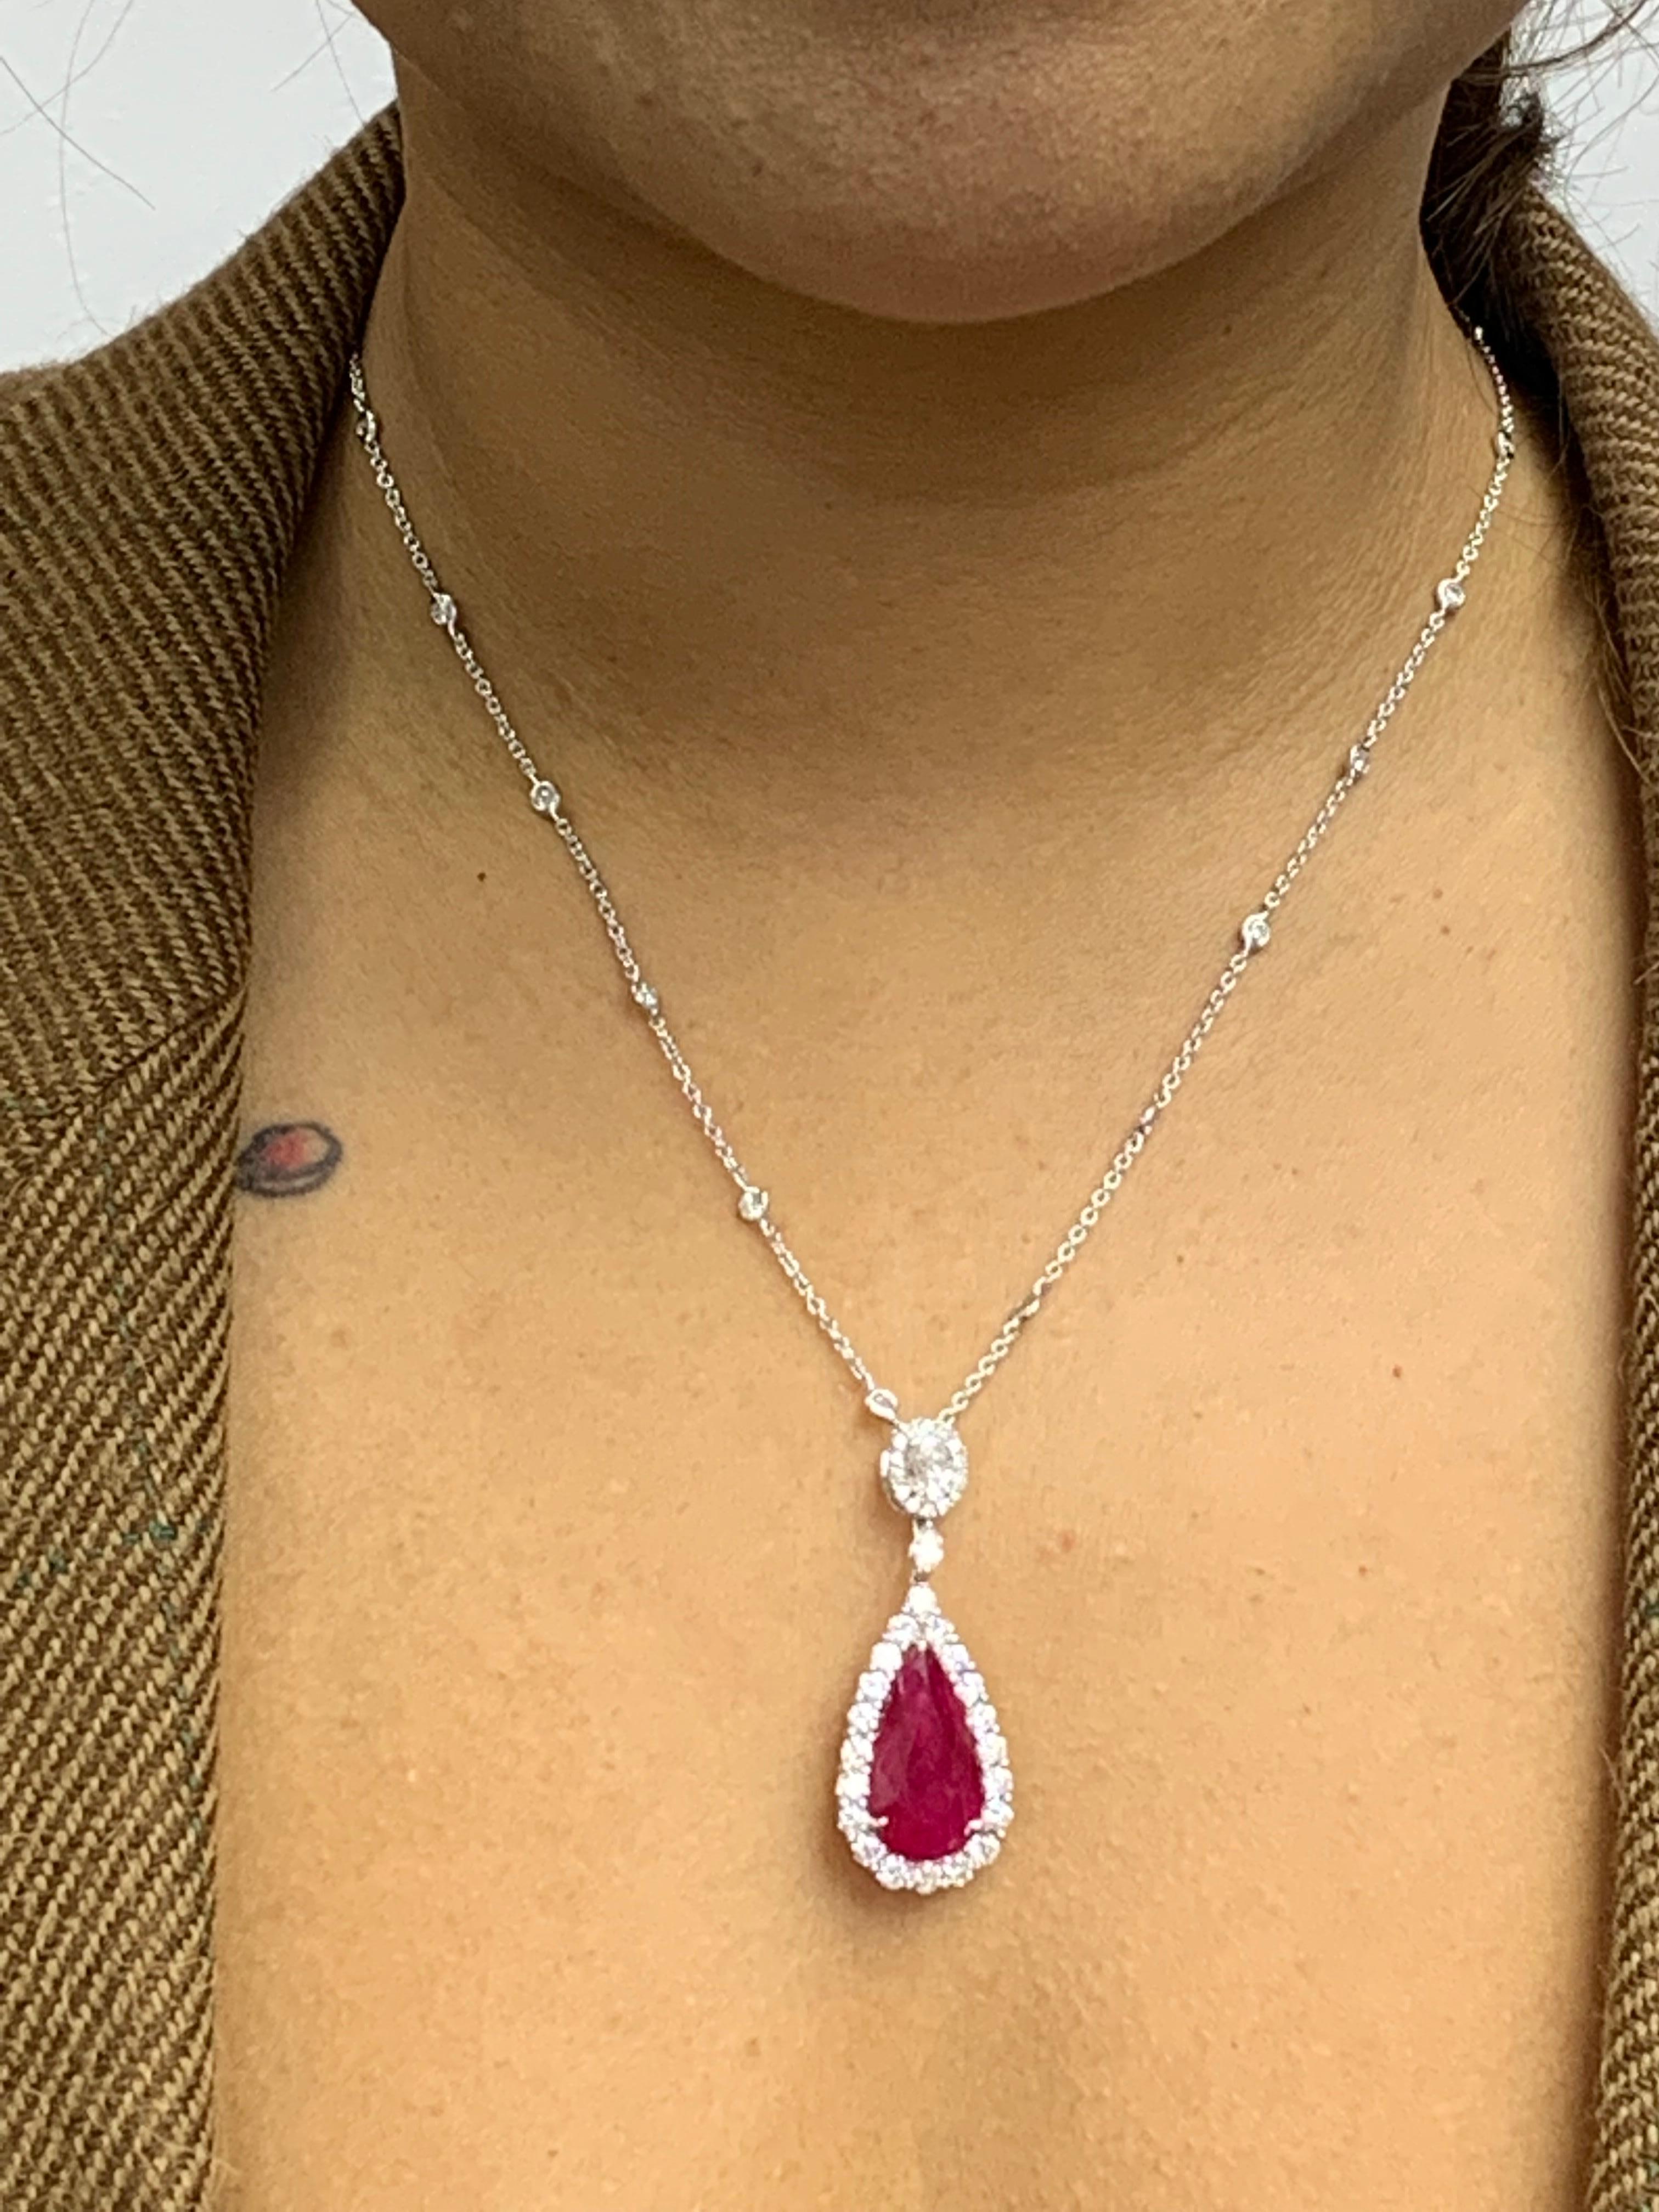 7.20 Carat Pear Shape Ruby and Diamond Halo Drop Necklace in 18K White Gold For Sale 7